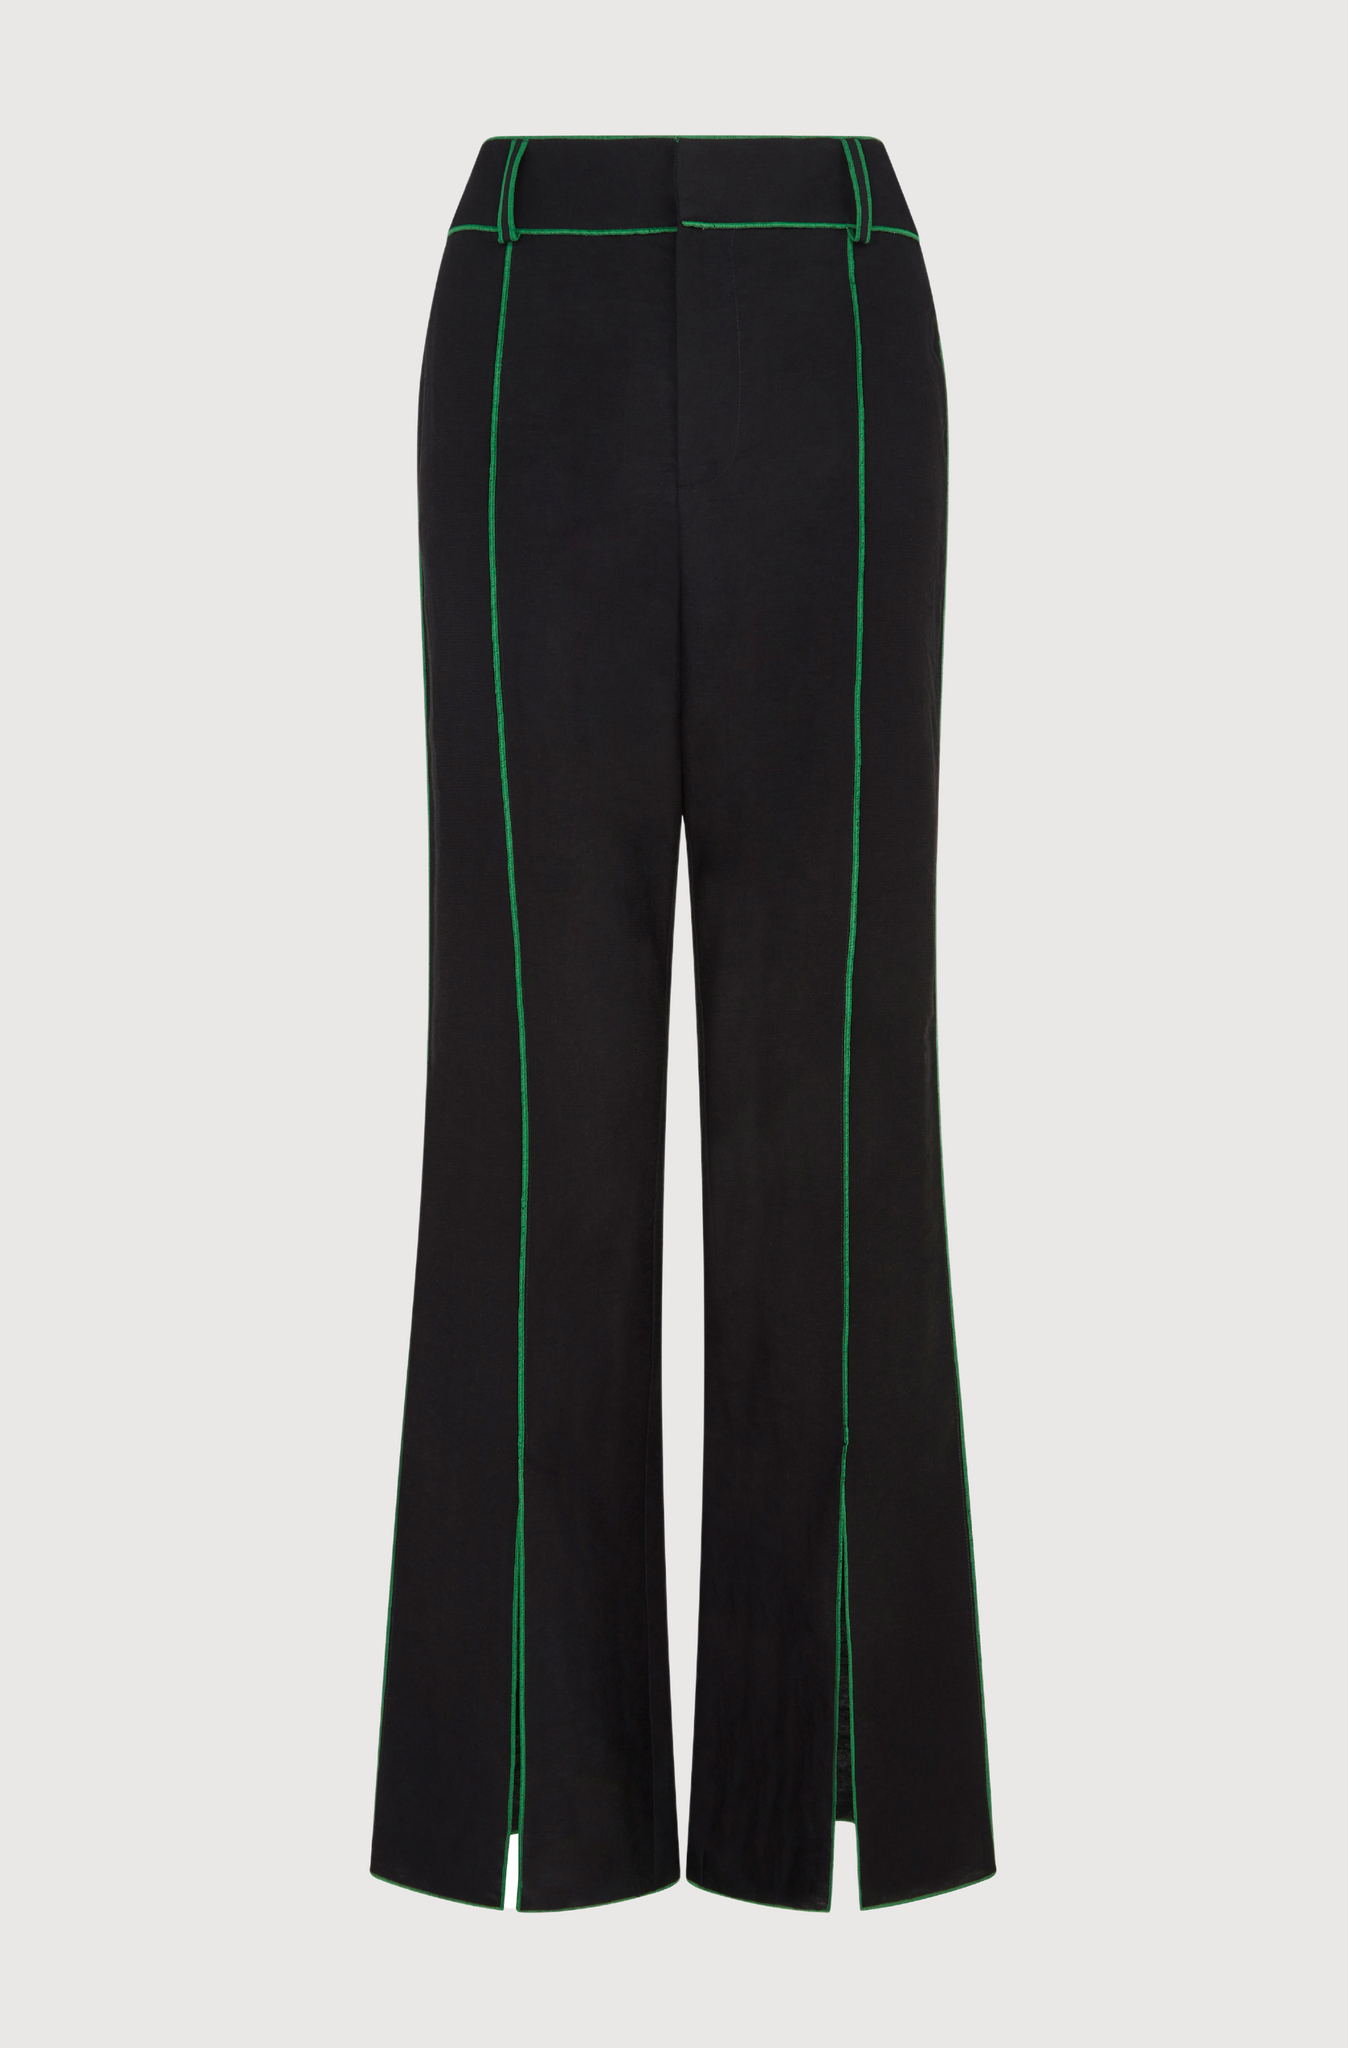 FRONT SPLIT TAILORED TROUSERS - BLACK/GREEN